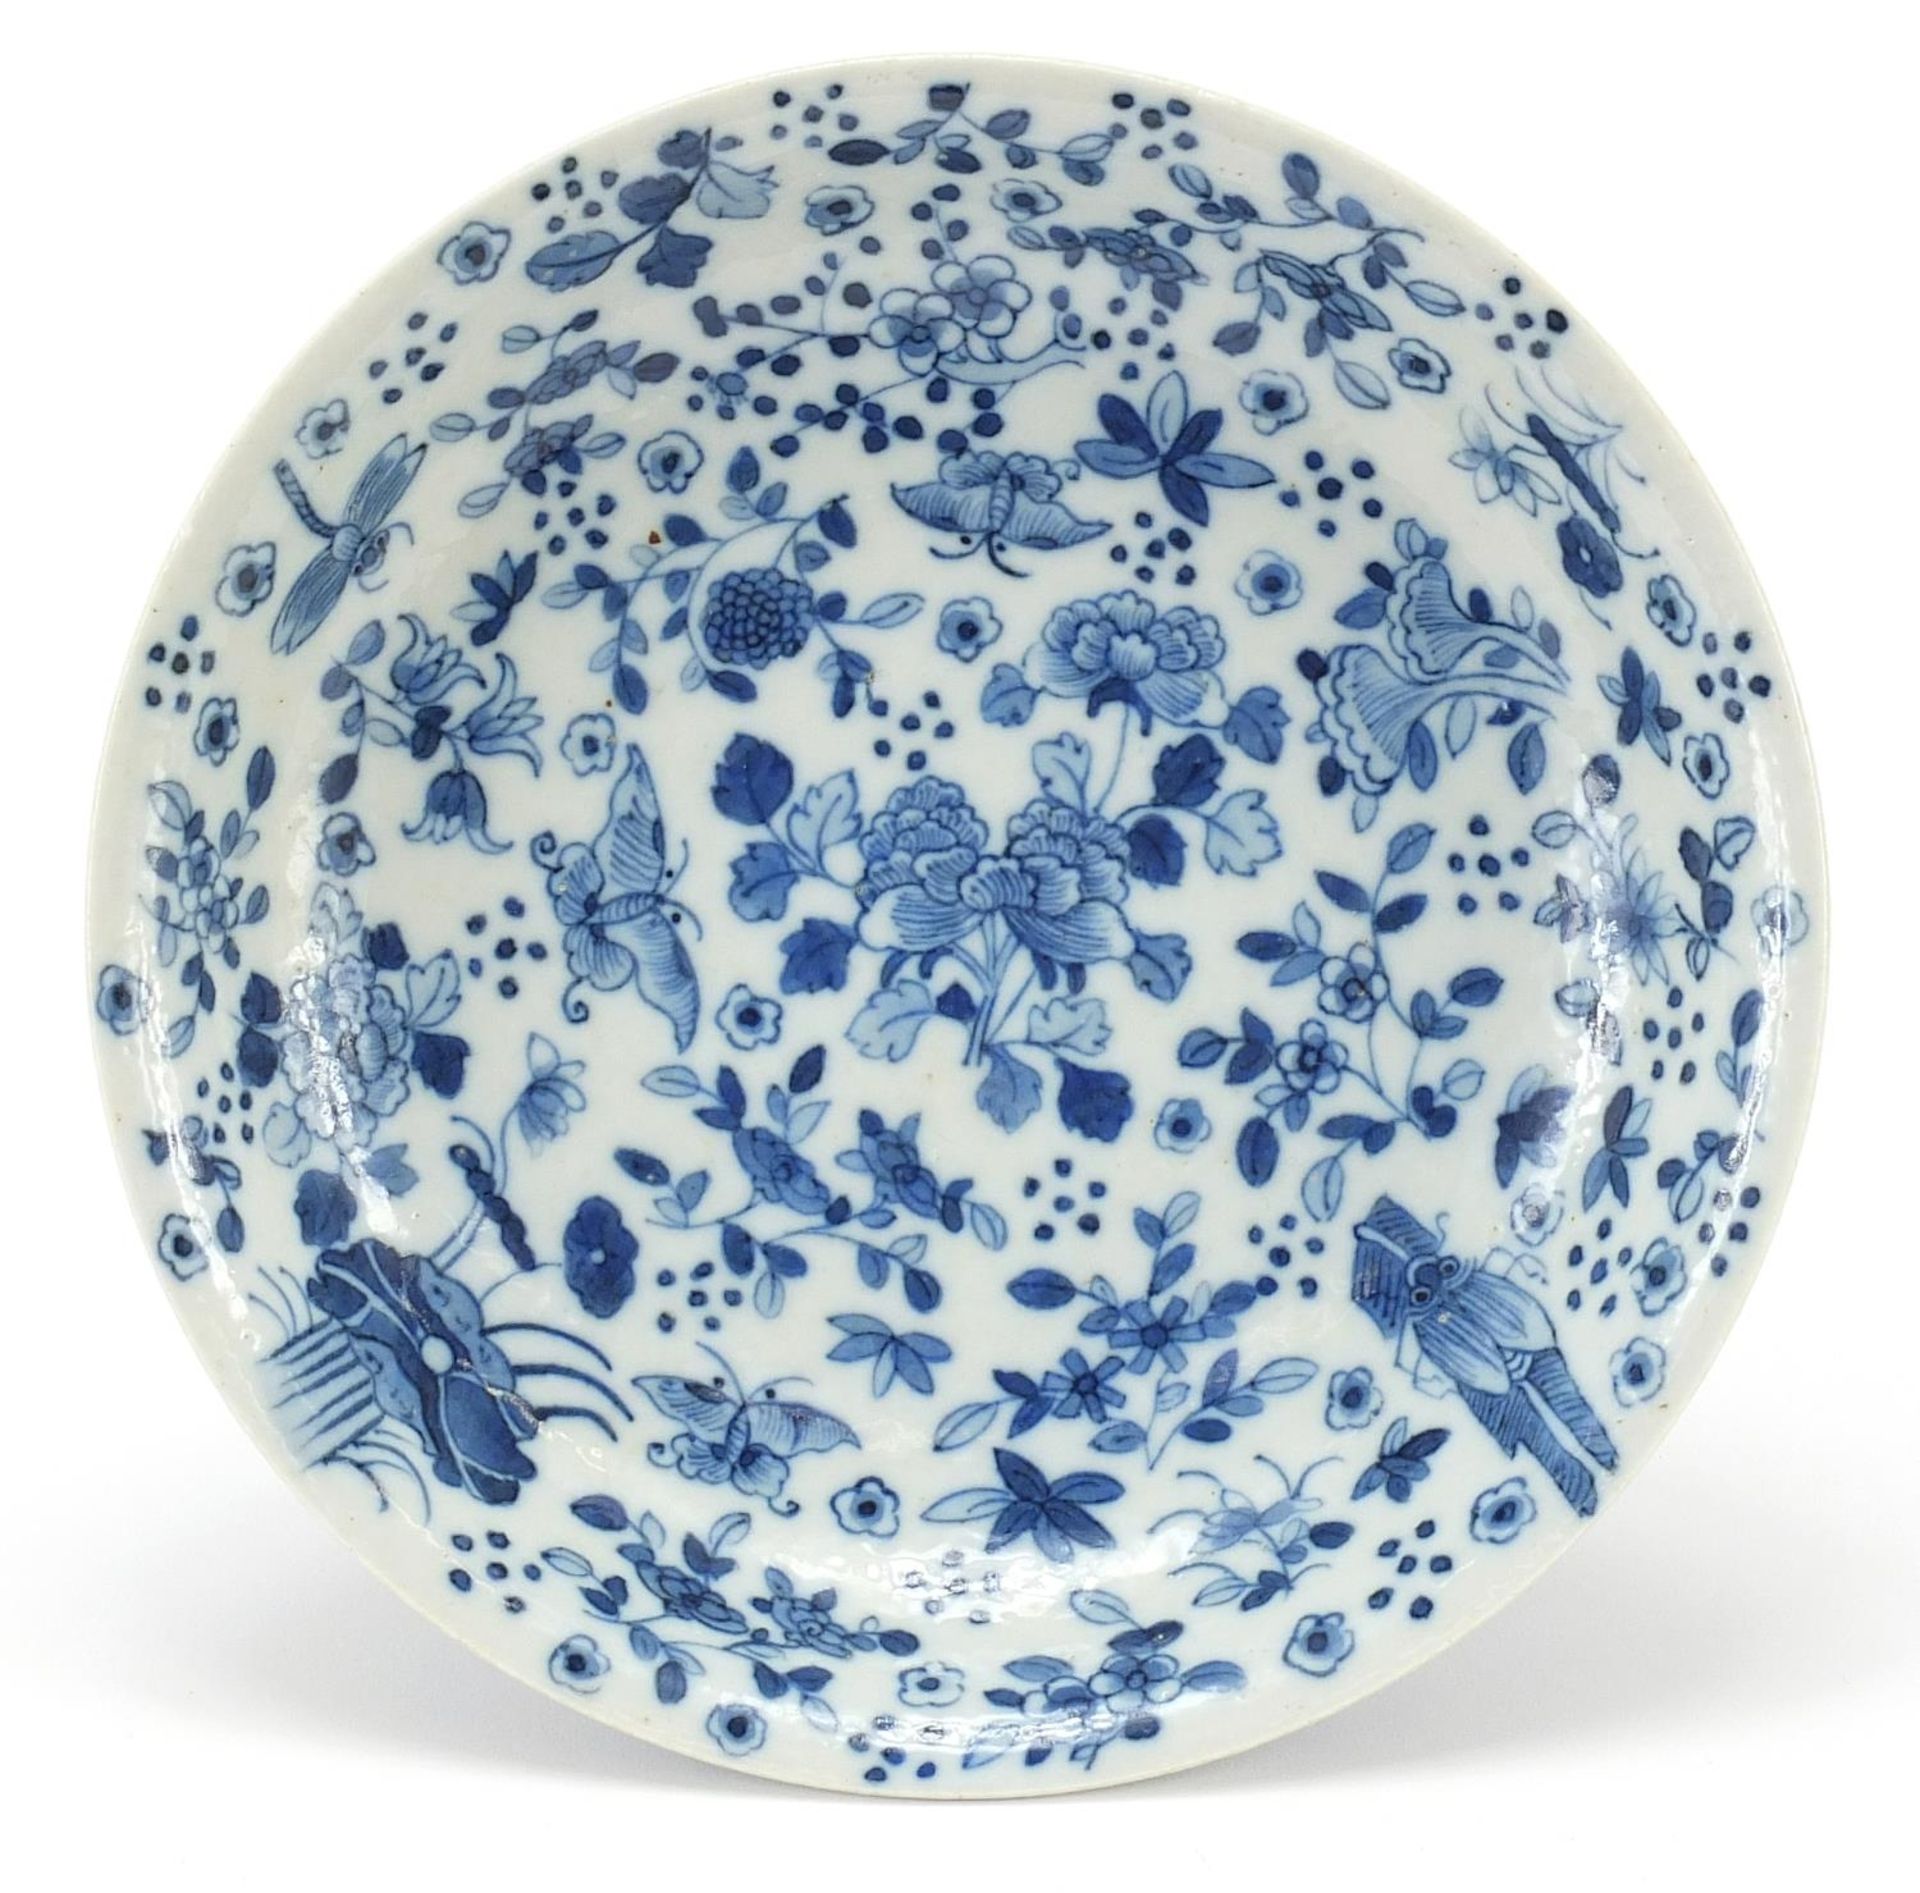 Chinese blue and white porcelain stem dish hand painted with flowers, 14cm high x 21cm in diameter - Image 3 of 4